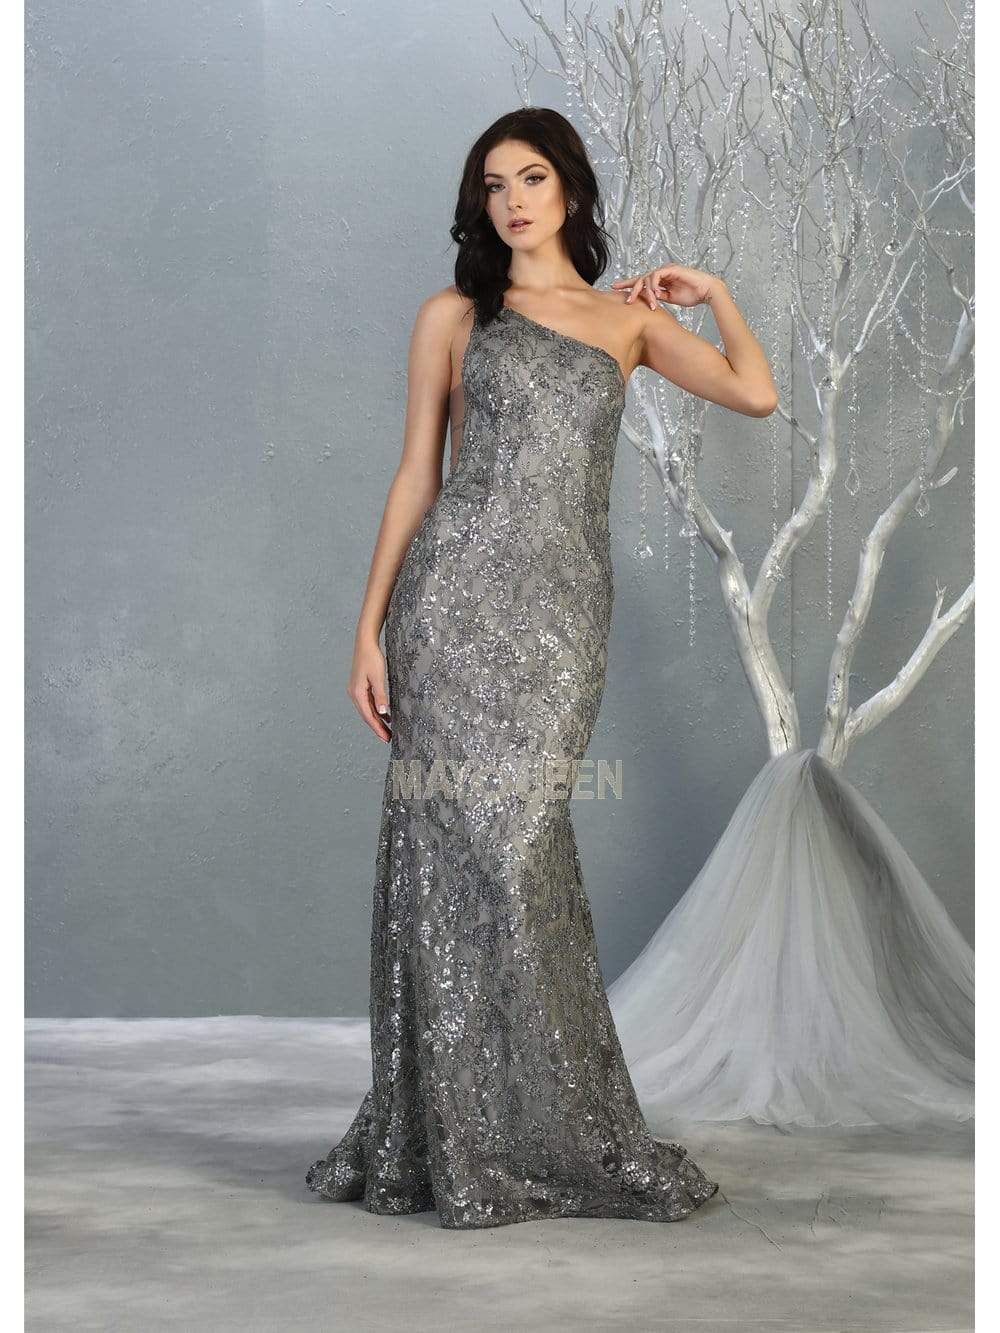 May Queen - Fitted Gliter Embellishments Mermaid Evening Dress MQ1804SC In Silver